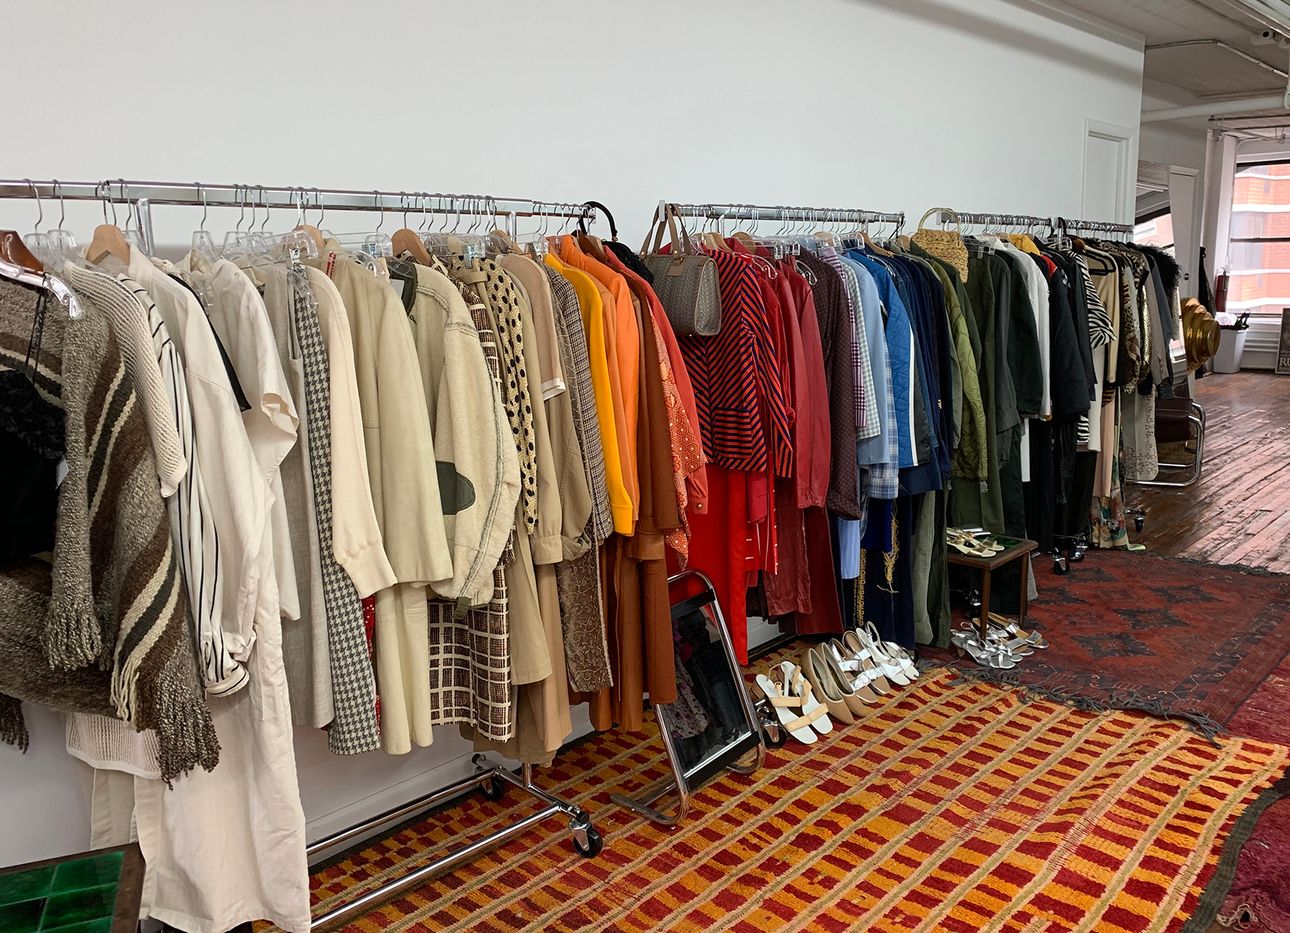 The interior of Object Limited, with racks of clothes along a wall.